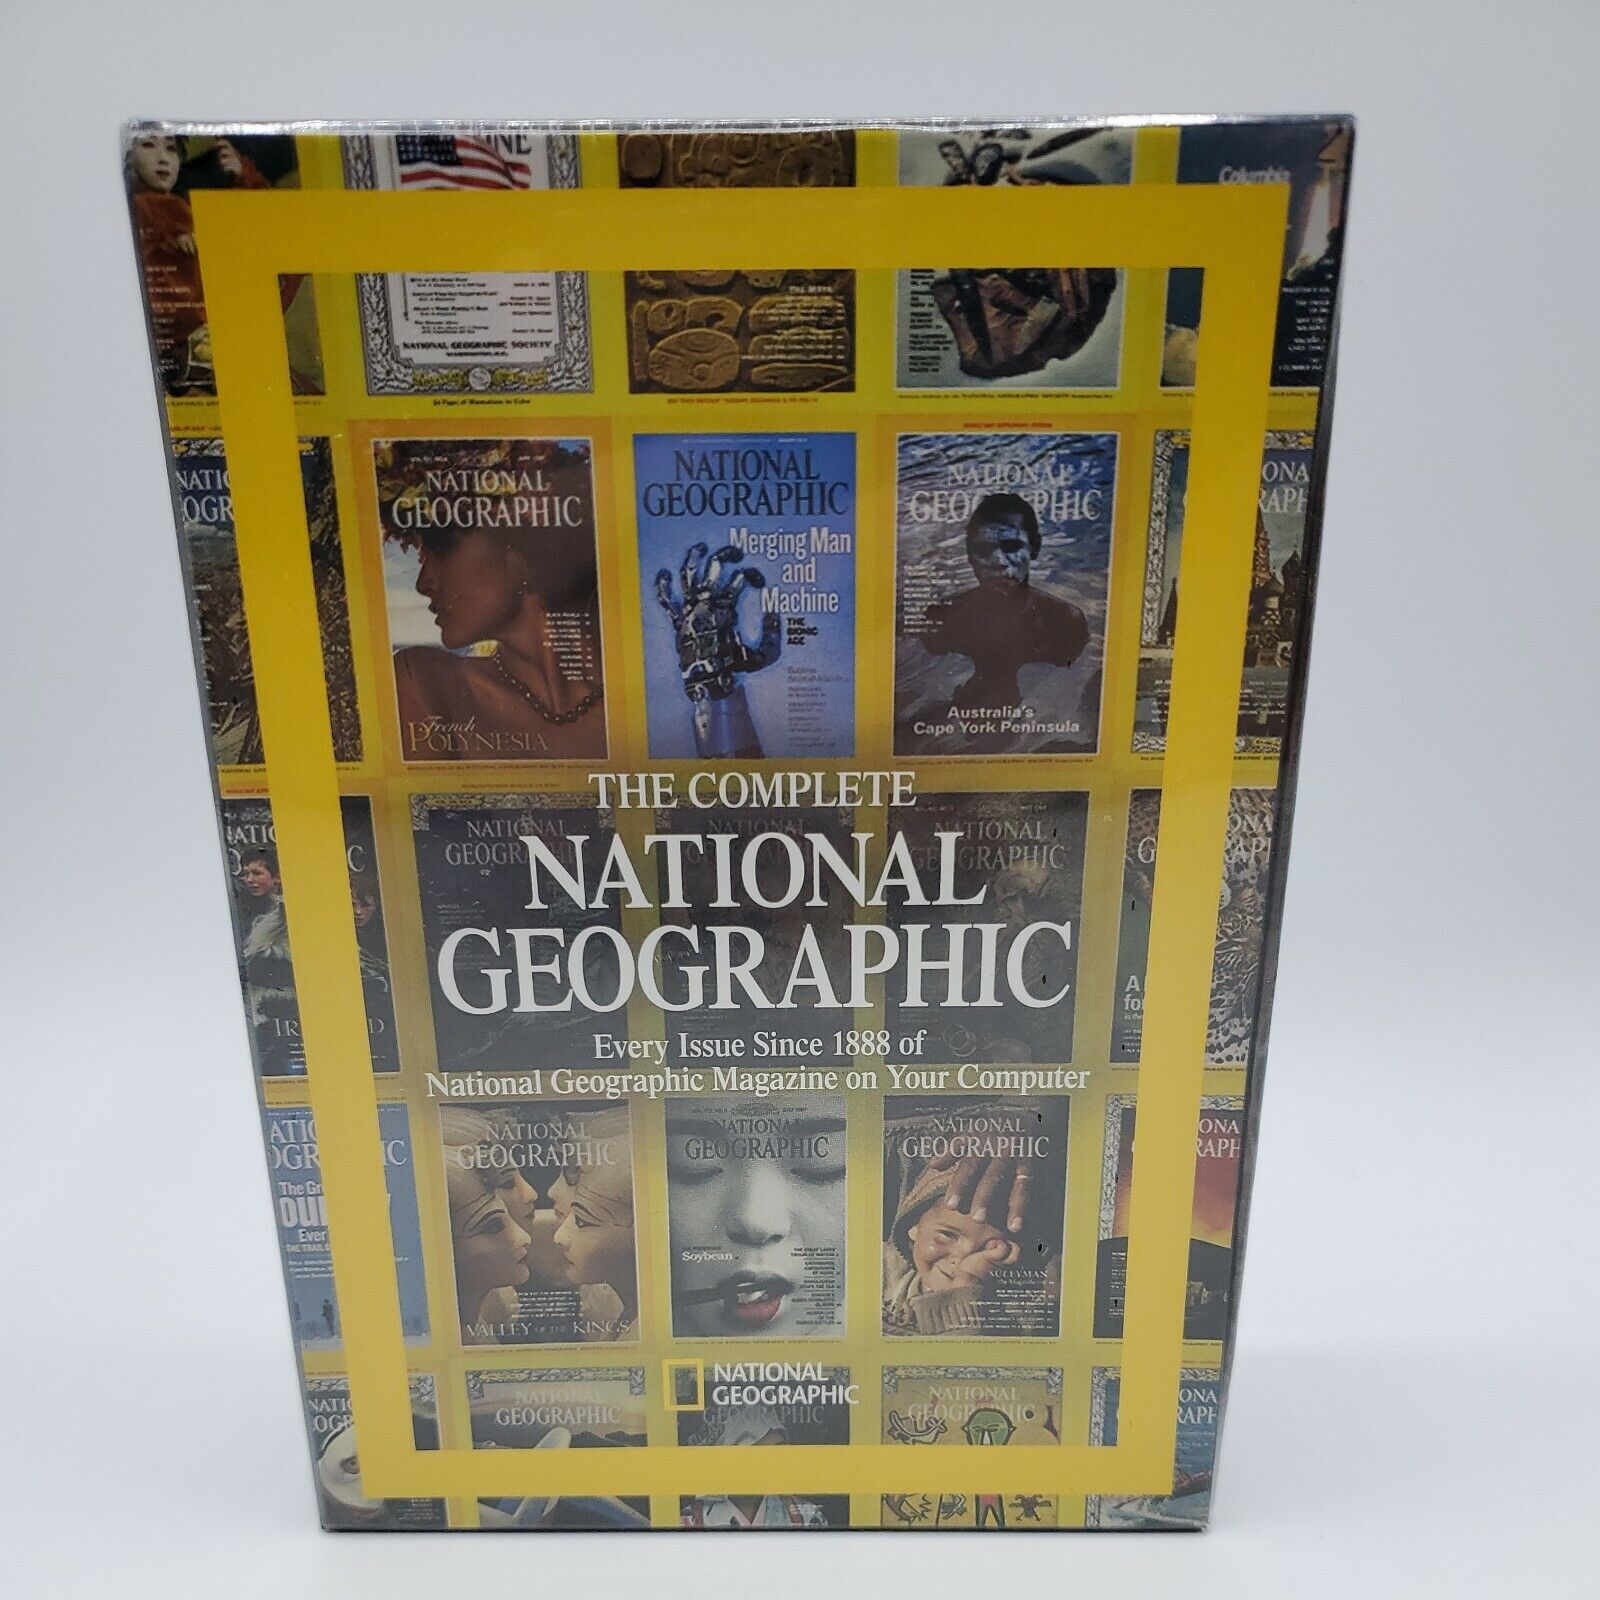 NEW! The Complete National Geographic Every Issue Since 1888, 7 DVD-ROMs